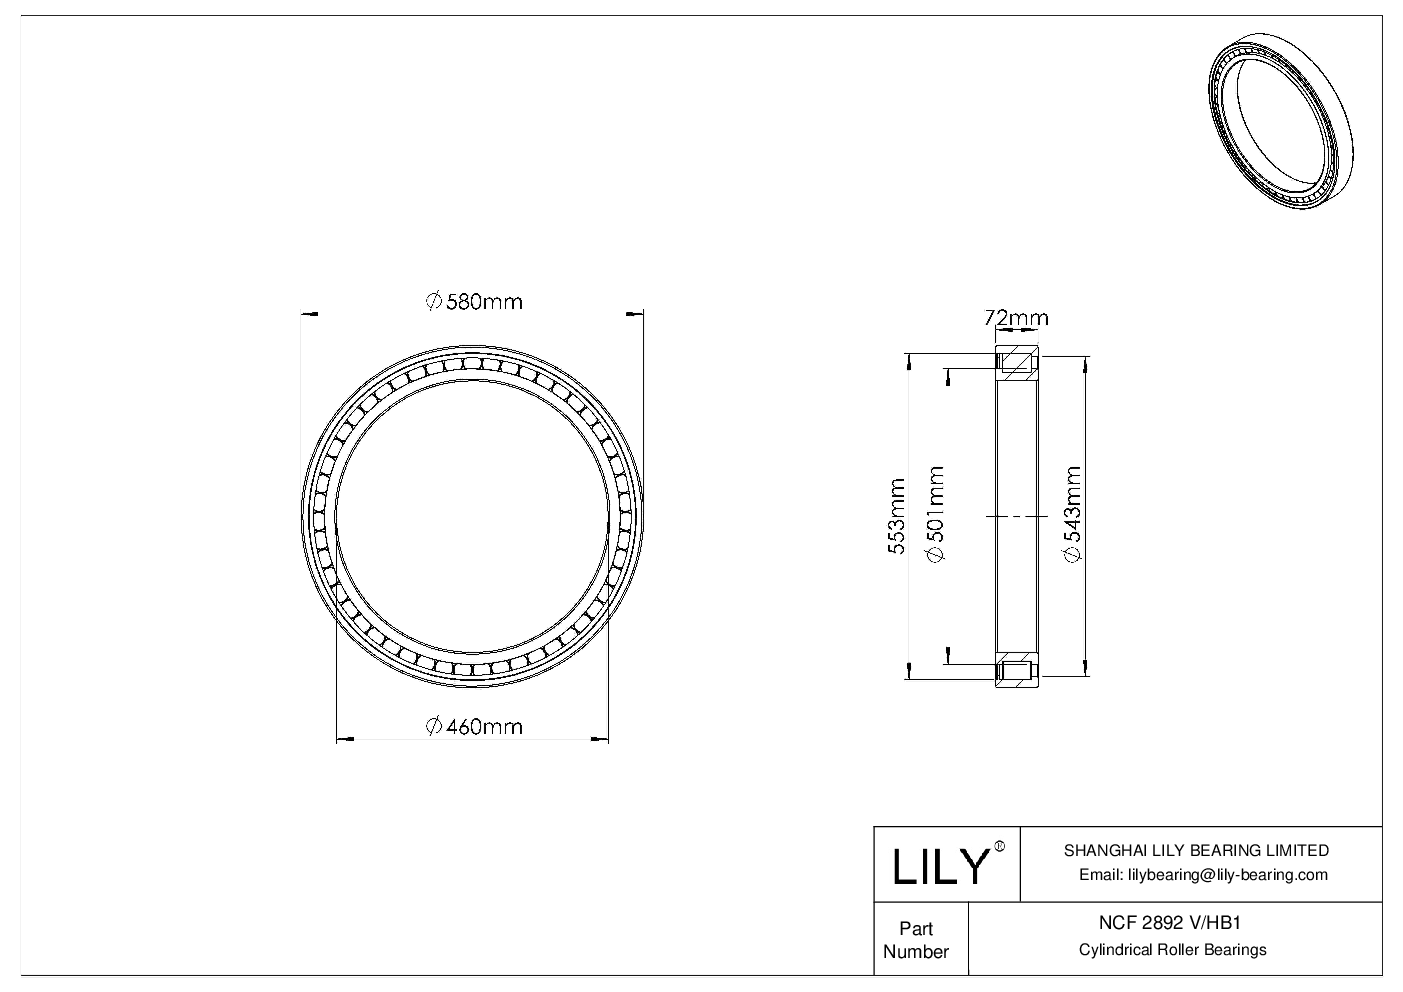 NCF 2892 V/HB1 Single Row Full Complement Cylindrical Roller Bearings cad drawing